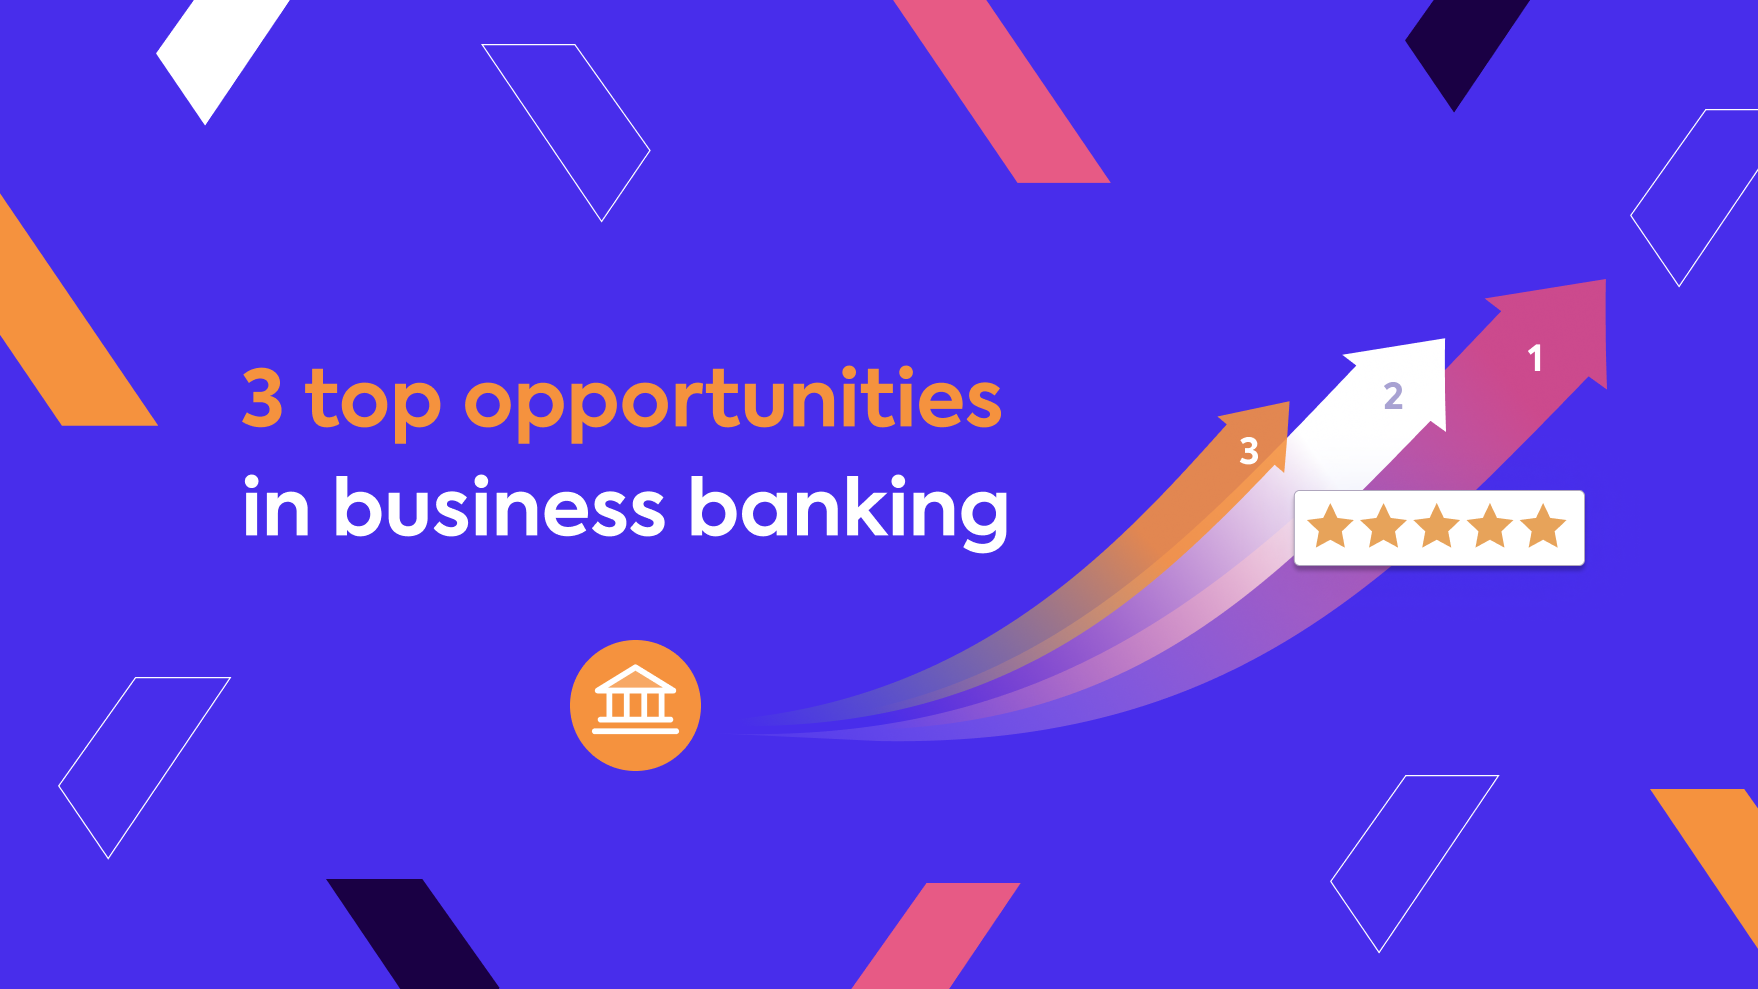 3 top opportunities in business banking